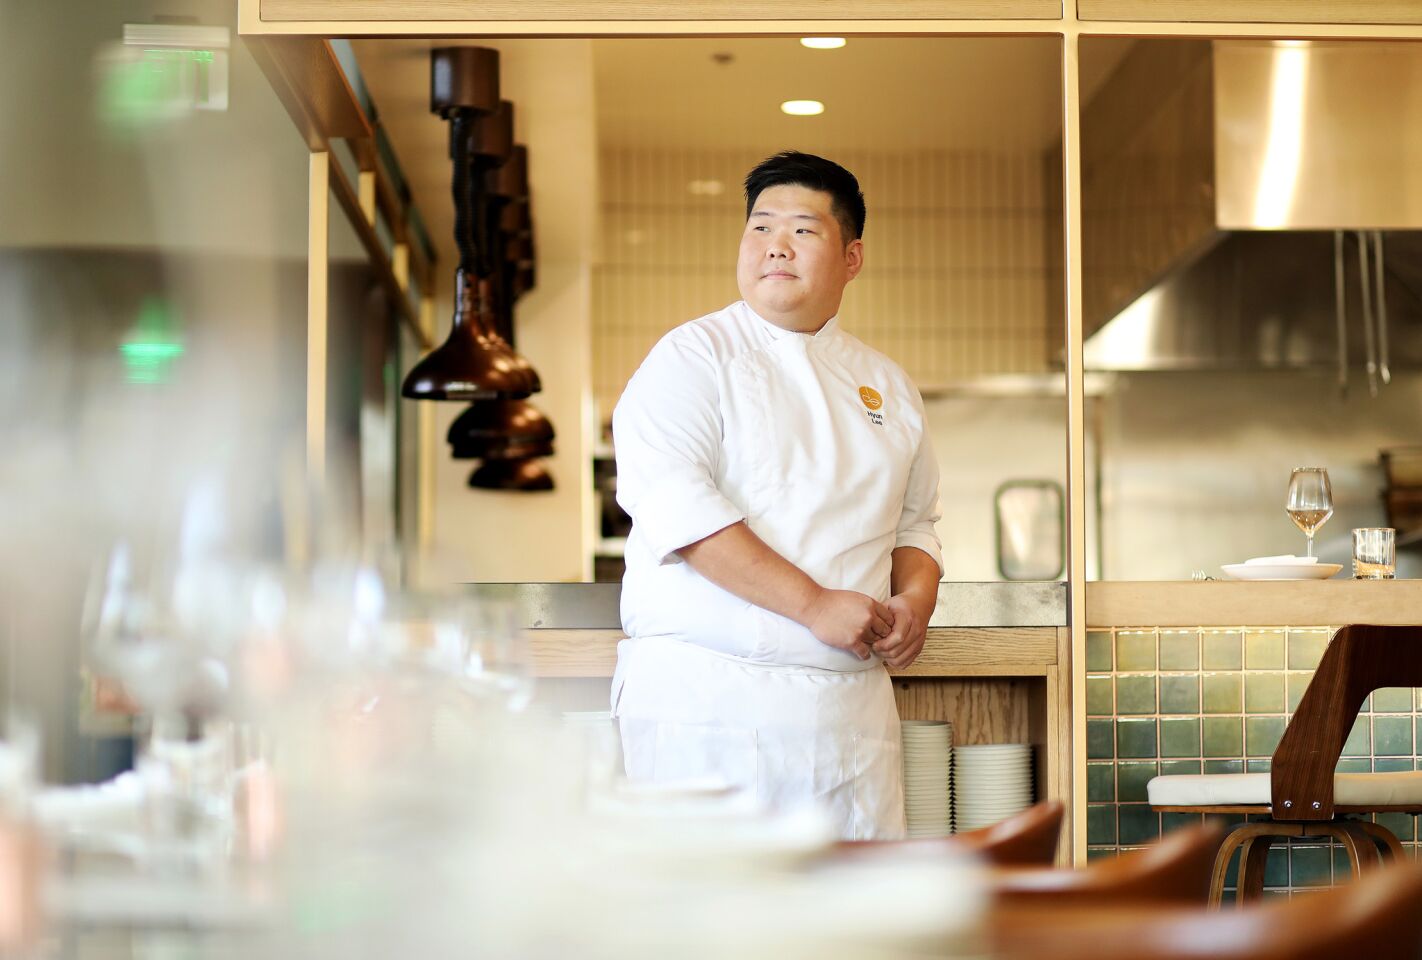 Jonathan Gold reviews 189 by Dominique Ansel